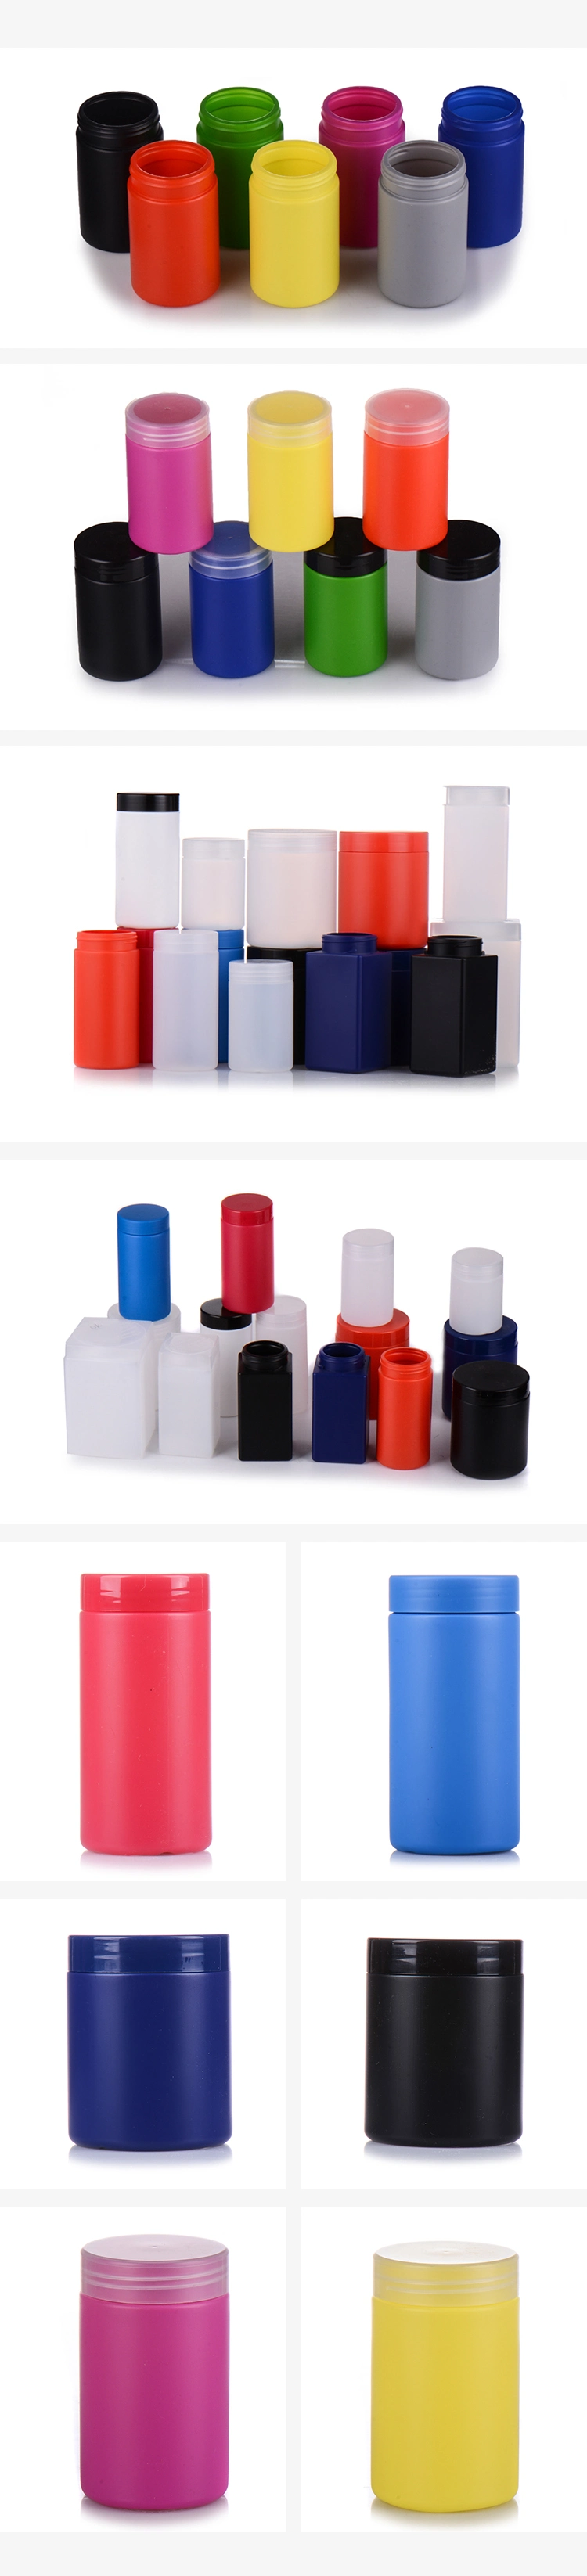 Professional HDPE Plastic Bottles for Nutrition Powder